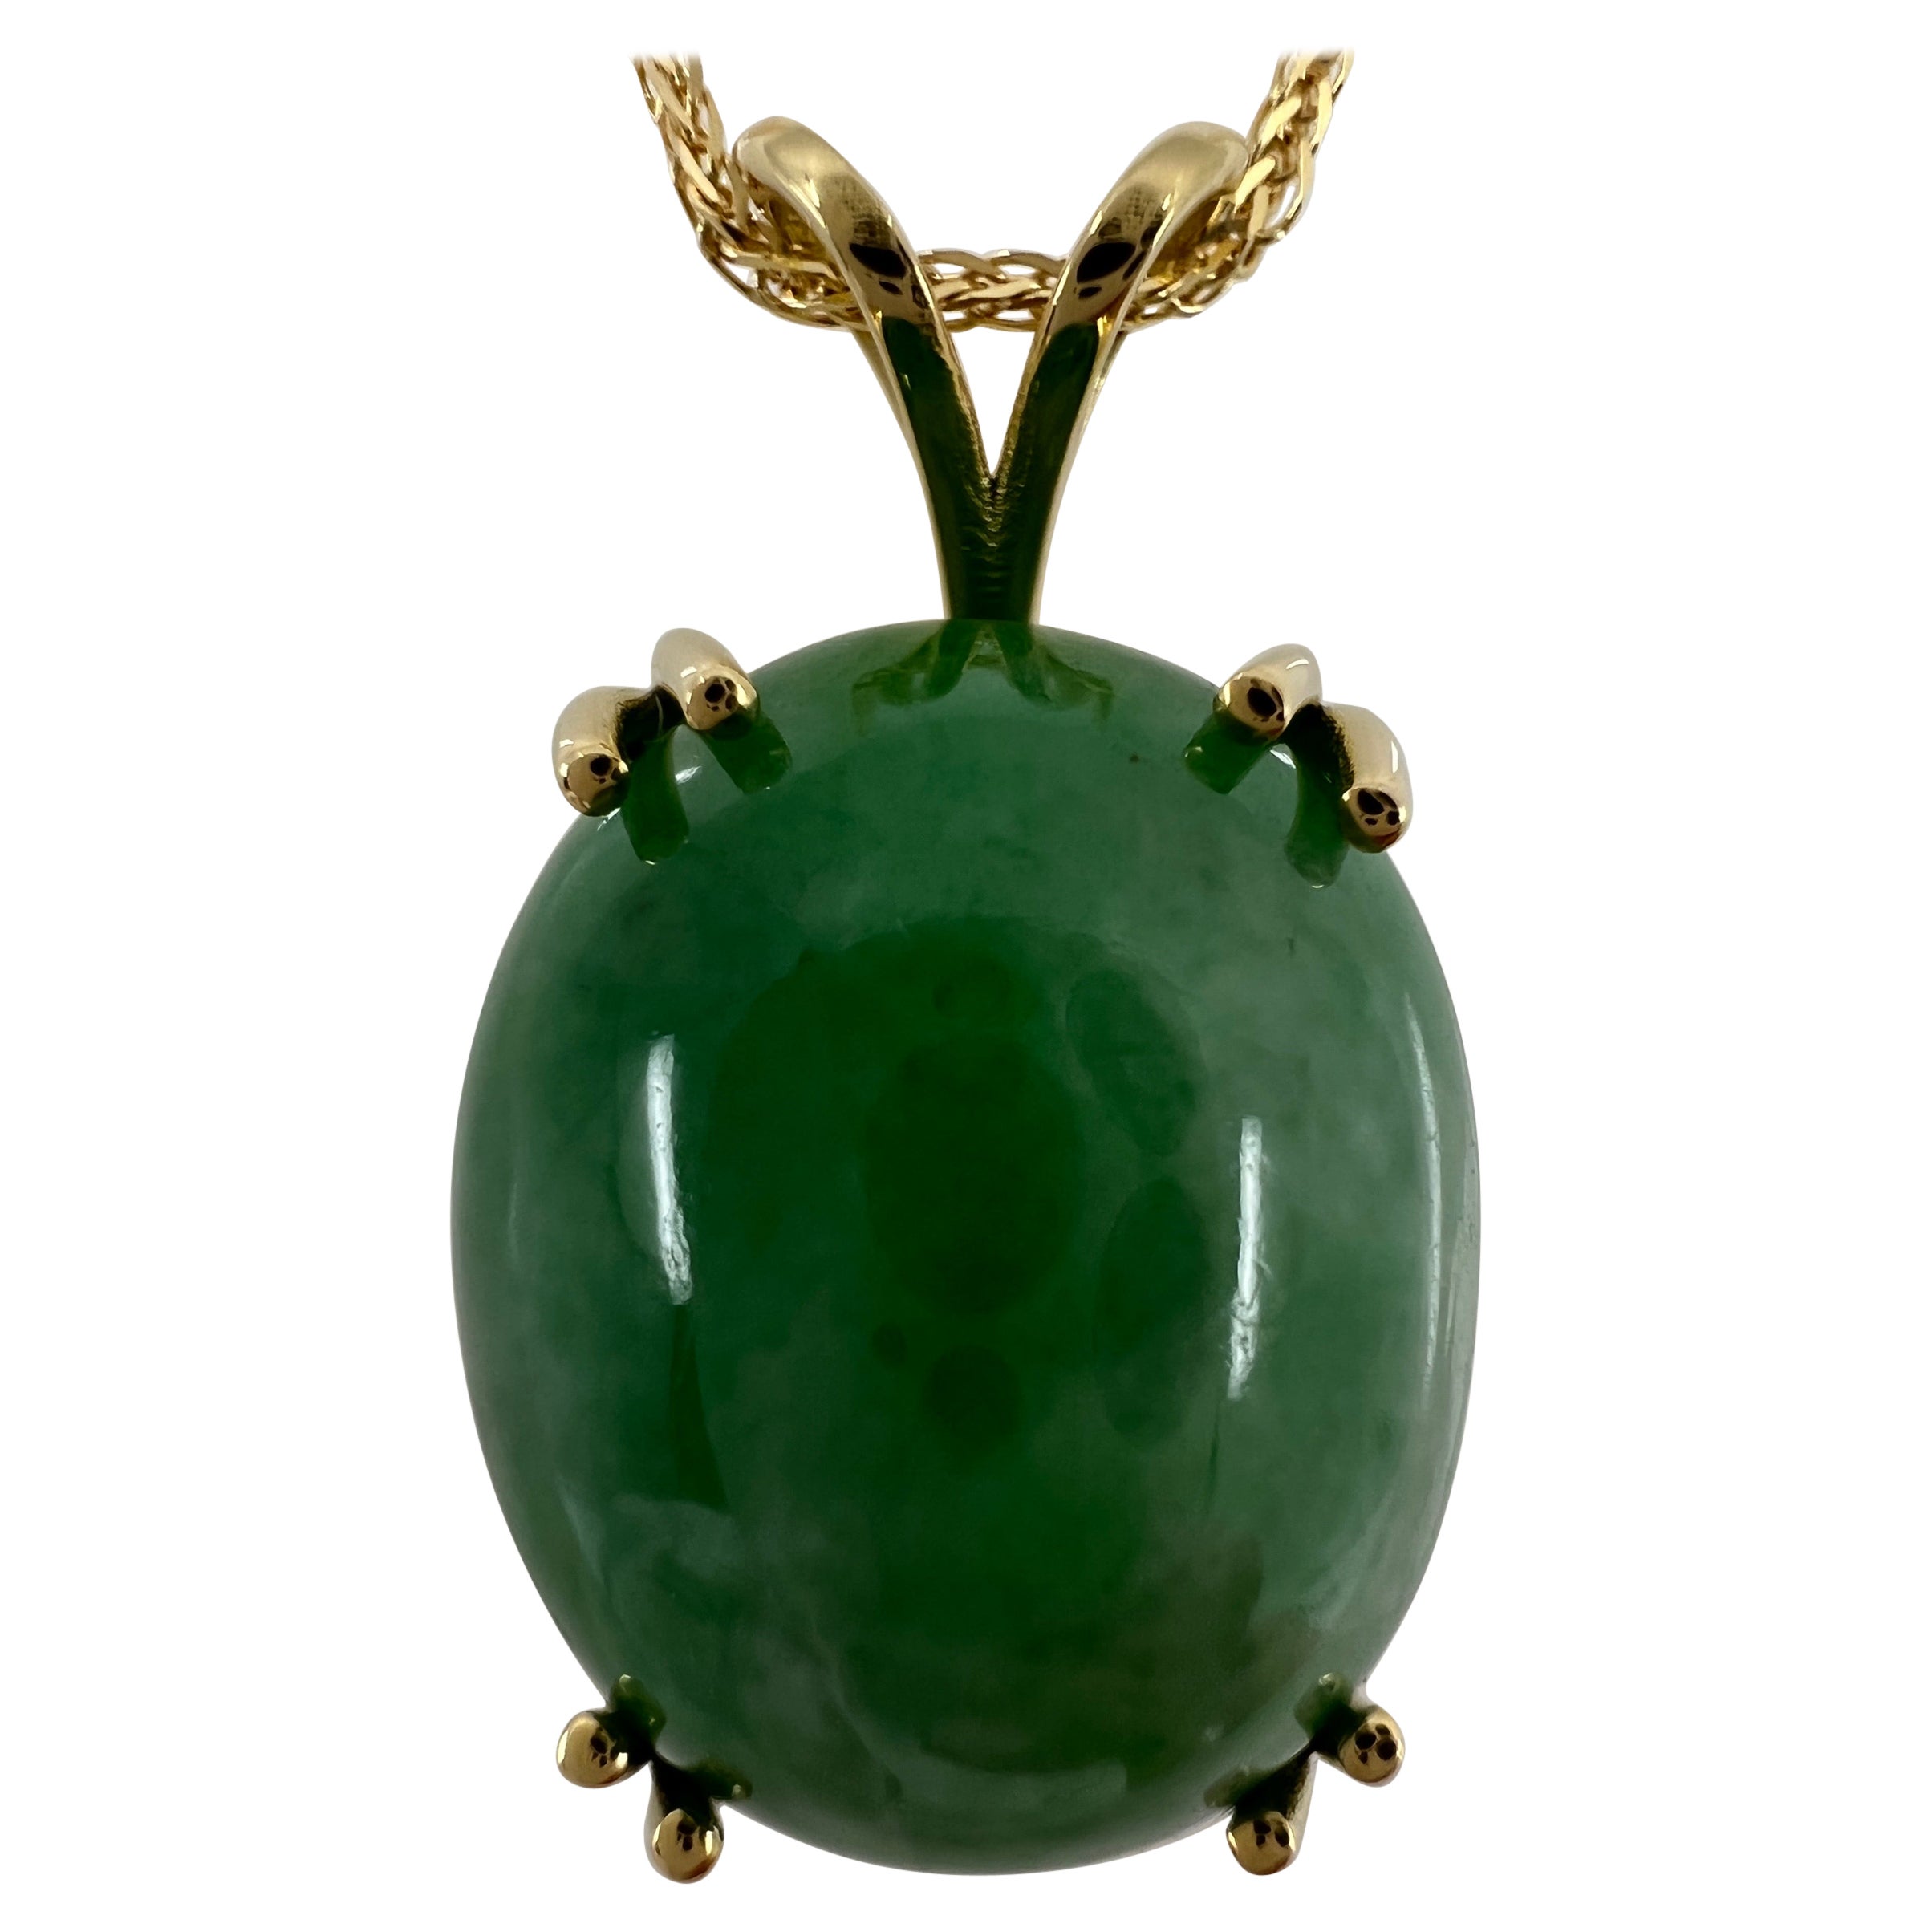 35.69ct GIA Certified Untreated Jadeite Jade A Grade 18k Yellow Gold Pendant For Sale